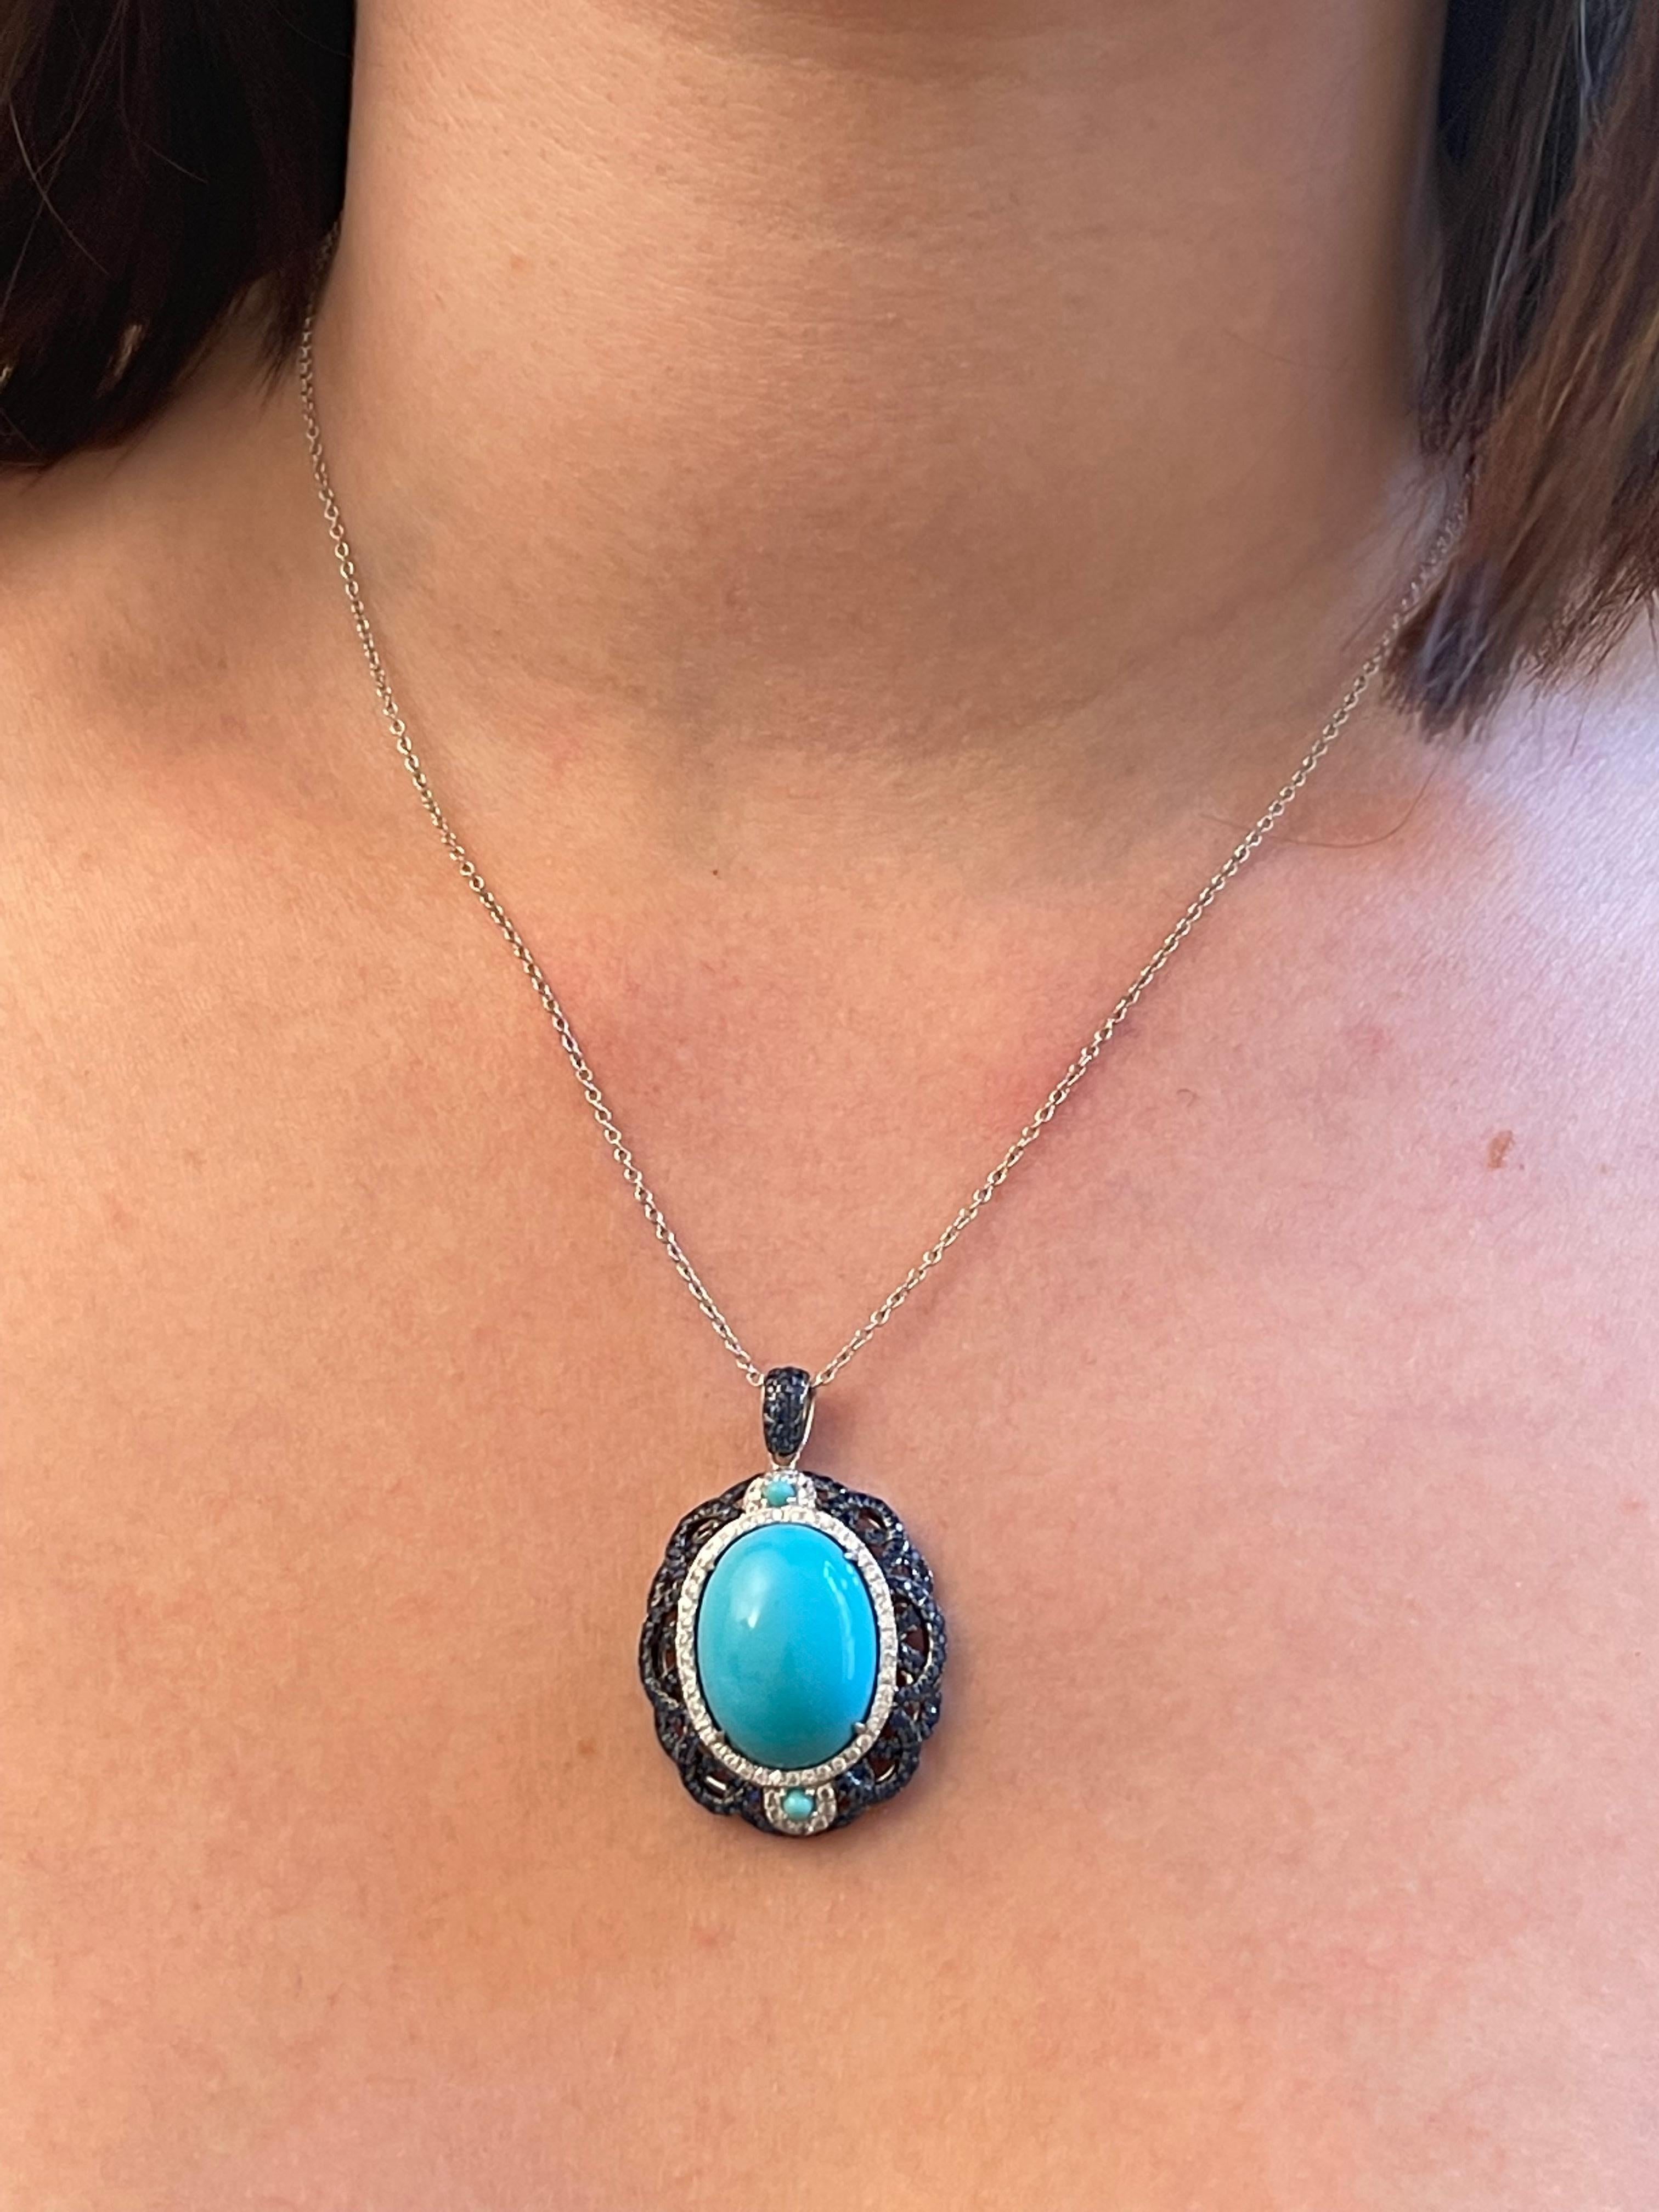 Pendant White Gold 18 K Gianni Lazzaro 

Diamonds 50-0,50 ct HSI 
Blue Sapphire 123-1,23ct
Turquoise  2-0,23ct
Turquoise  1-12,23ct

With a heritage of ancient fine Swiss jewelry traditions, NATKINA is a Geneva-based jewelry brand that creates